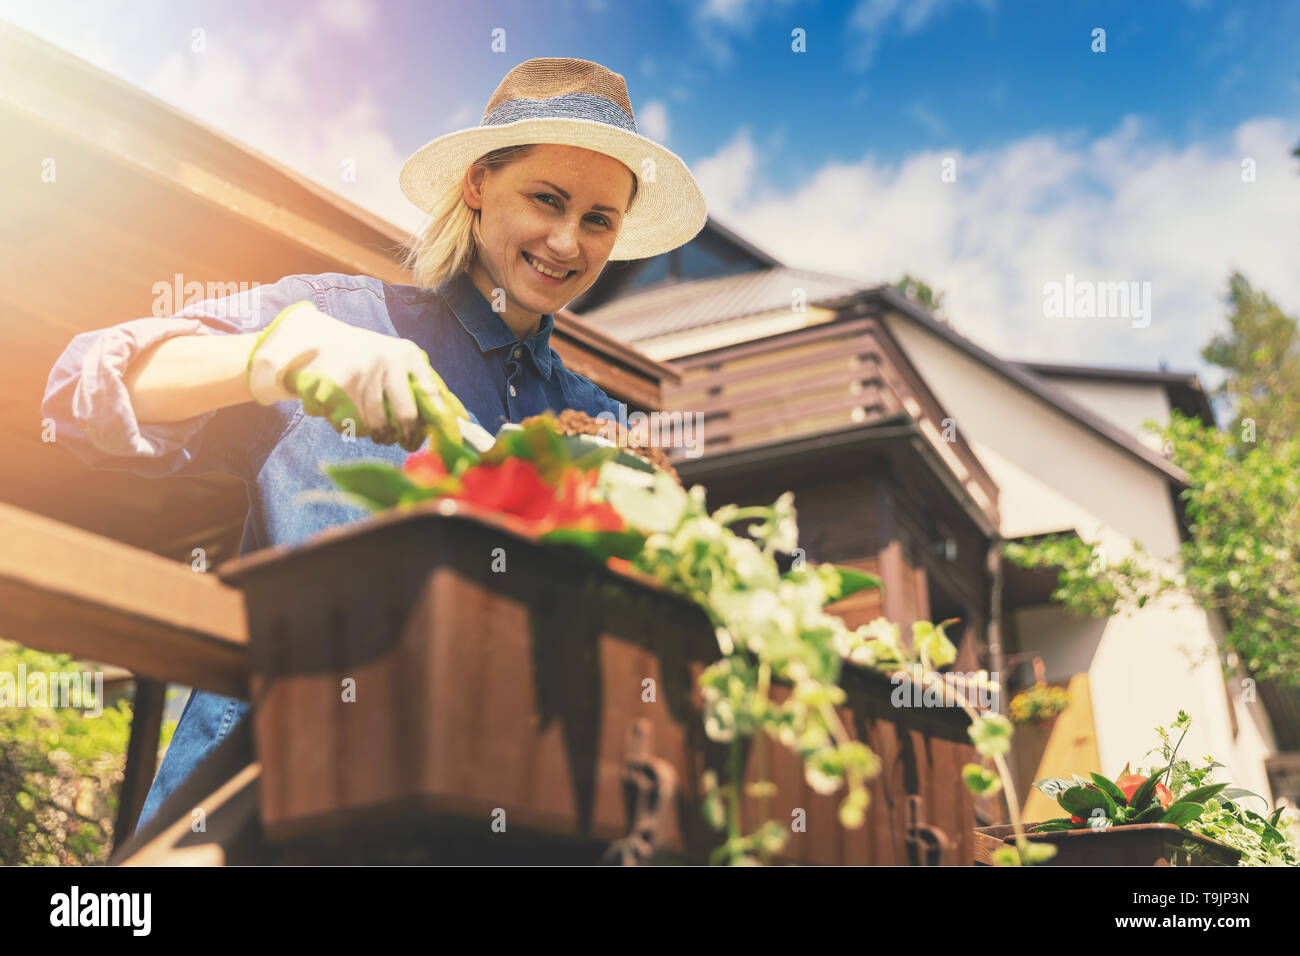 smiling young woman planting flowers in boxes on patio railings Stock Photo